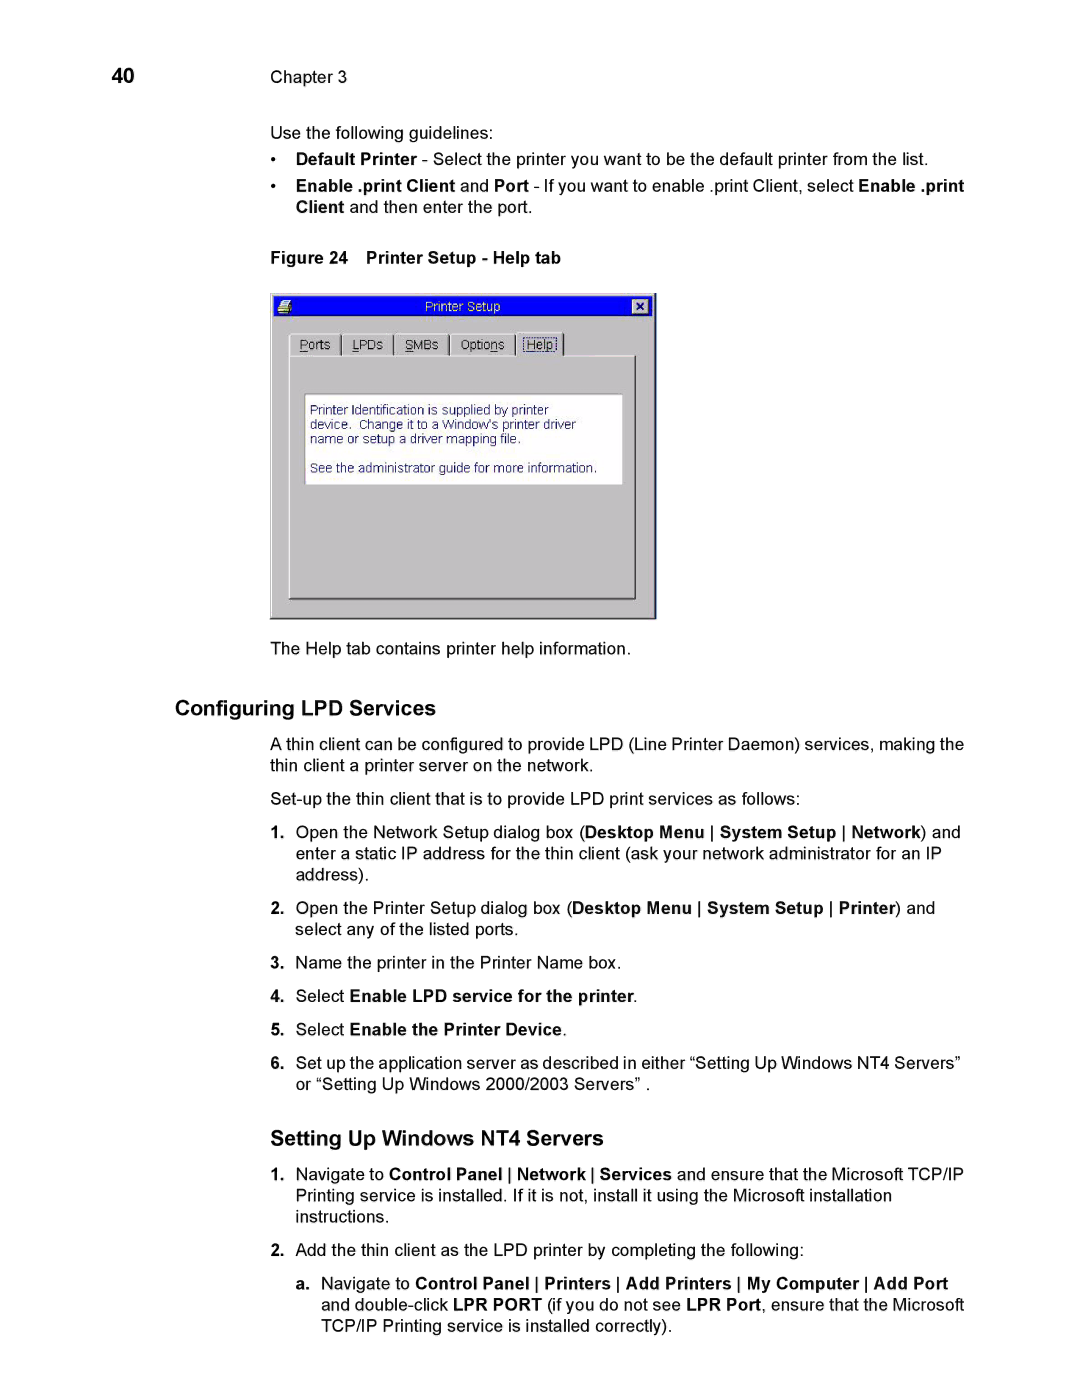 Wyse Technology 883681-08 Rev. E manual Configuring LPD Services, Setting Up Windows NT4 Servers 